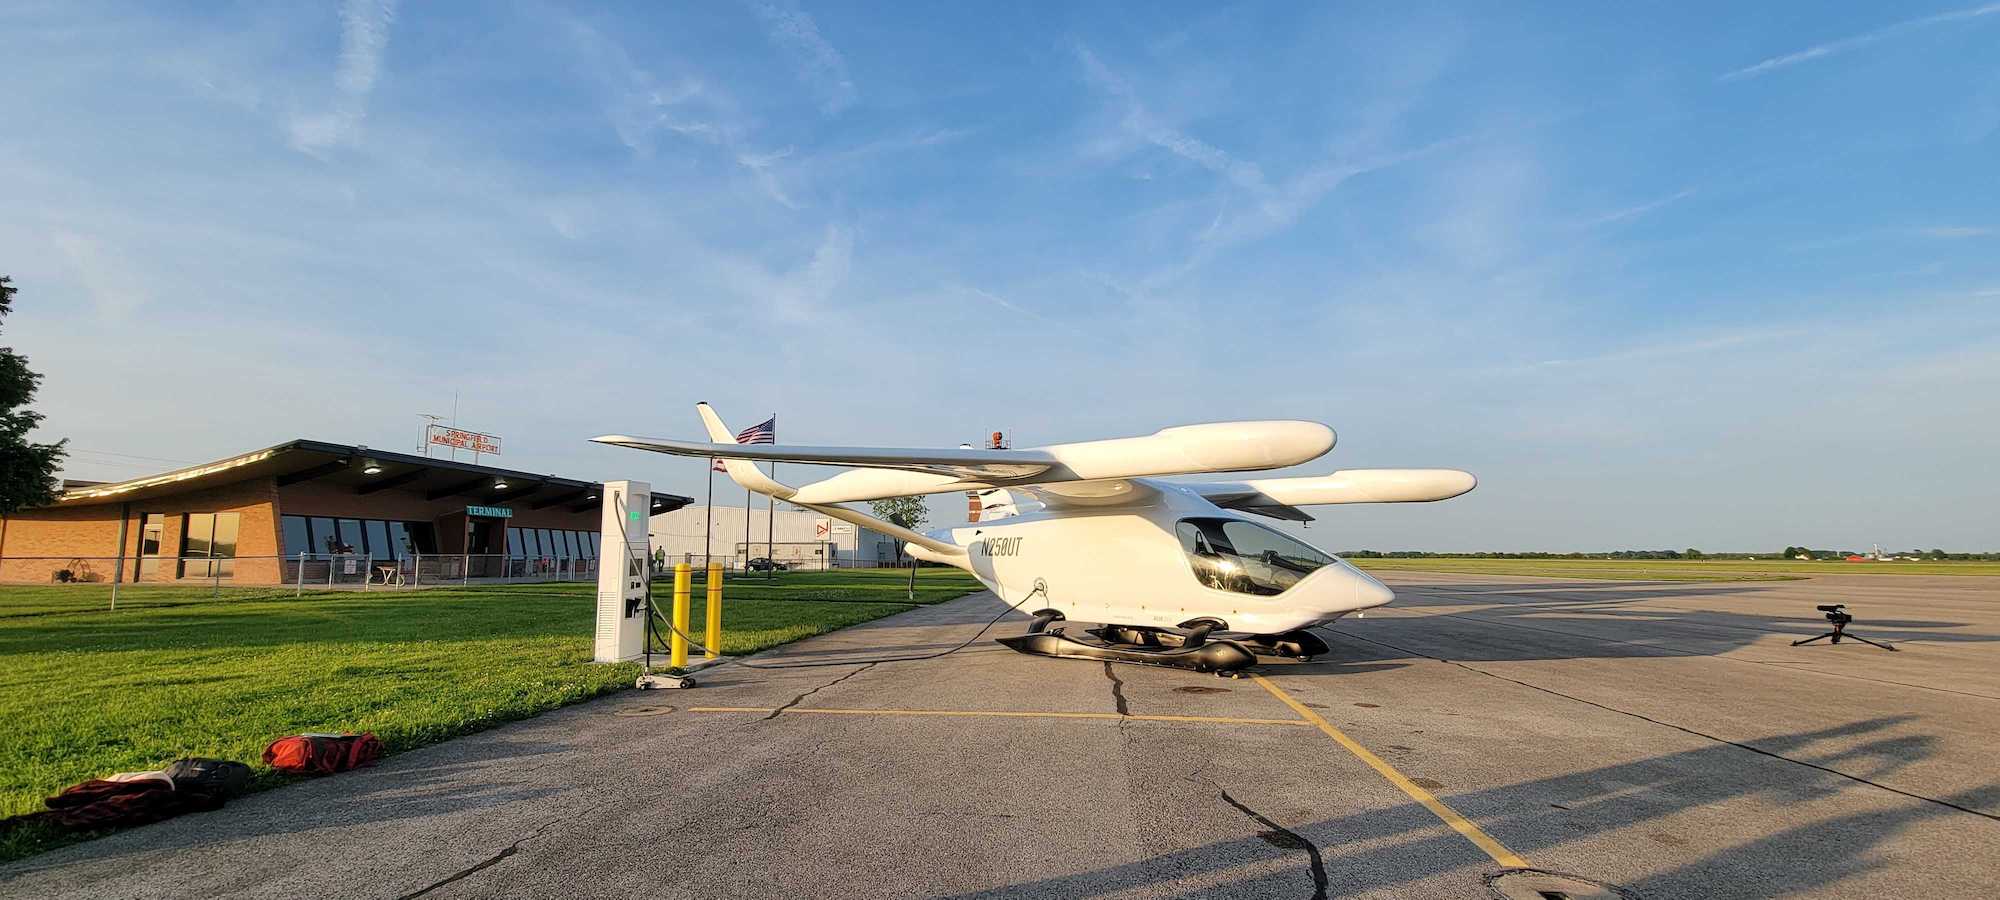 The aircraft plugged into a charger in Springfield, Ohio.